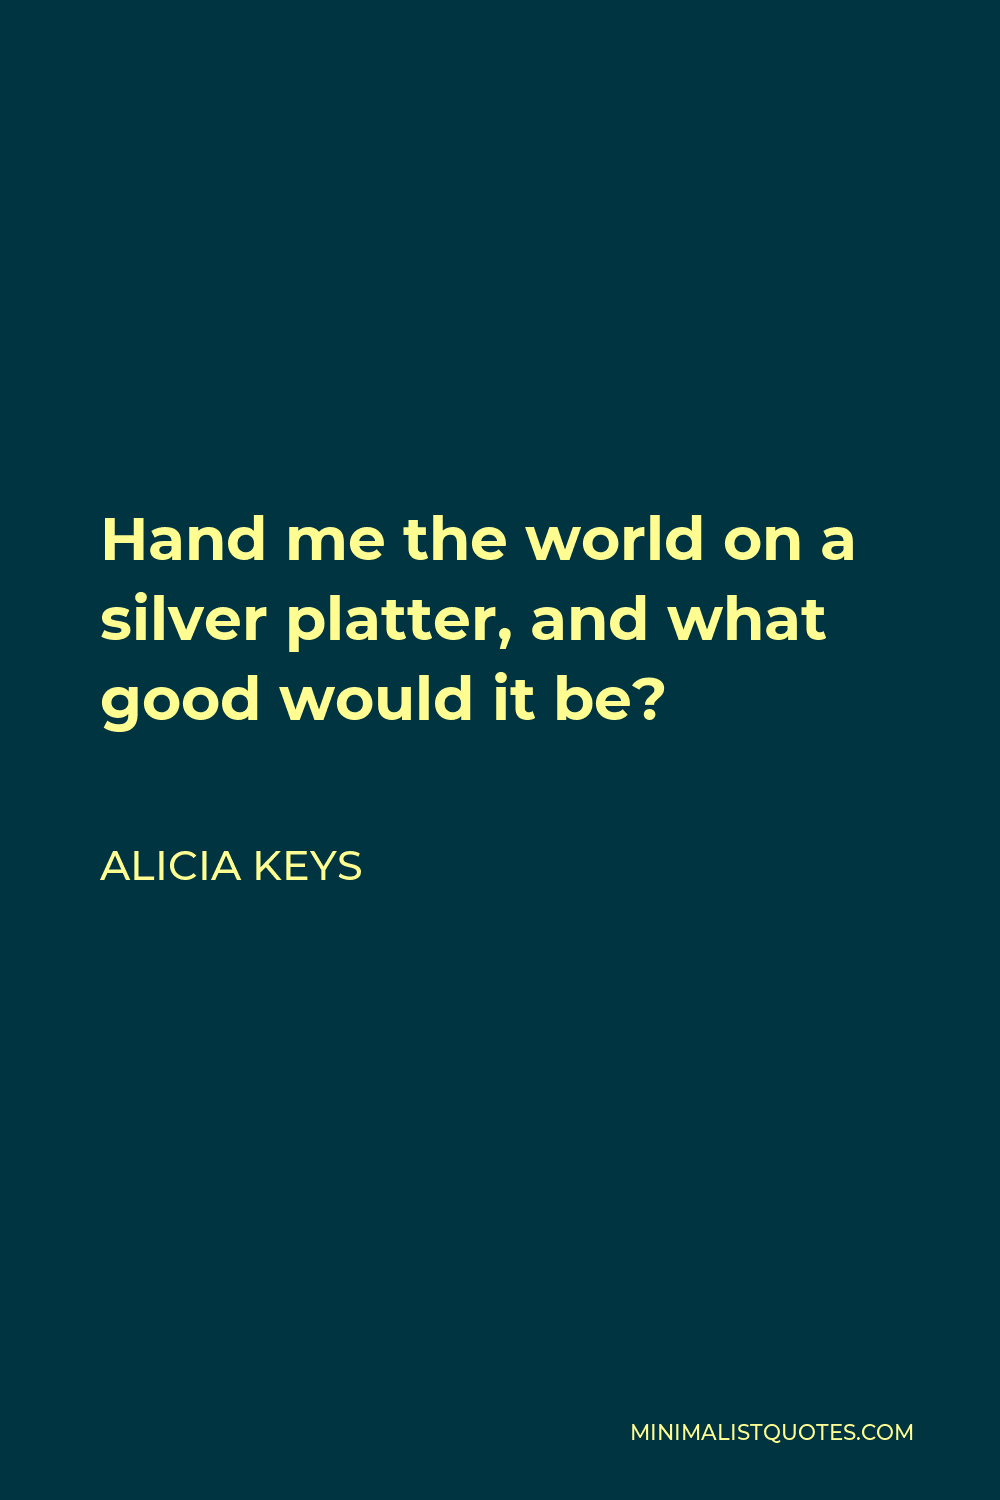 Alicia Keys Quote - Hand me the world on a silver platter, and what good would it be?